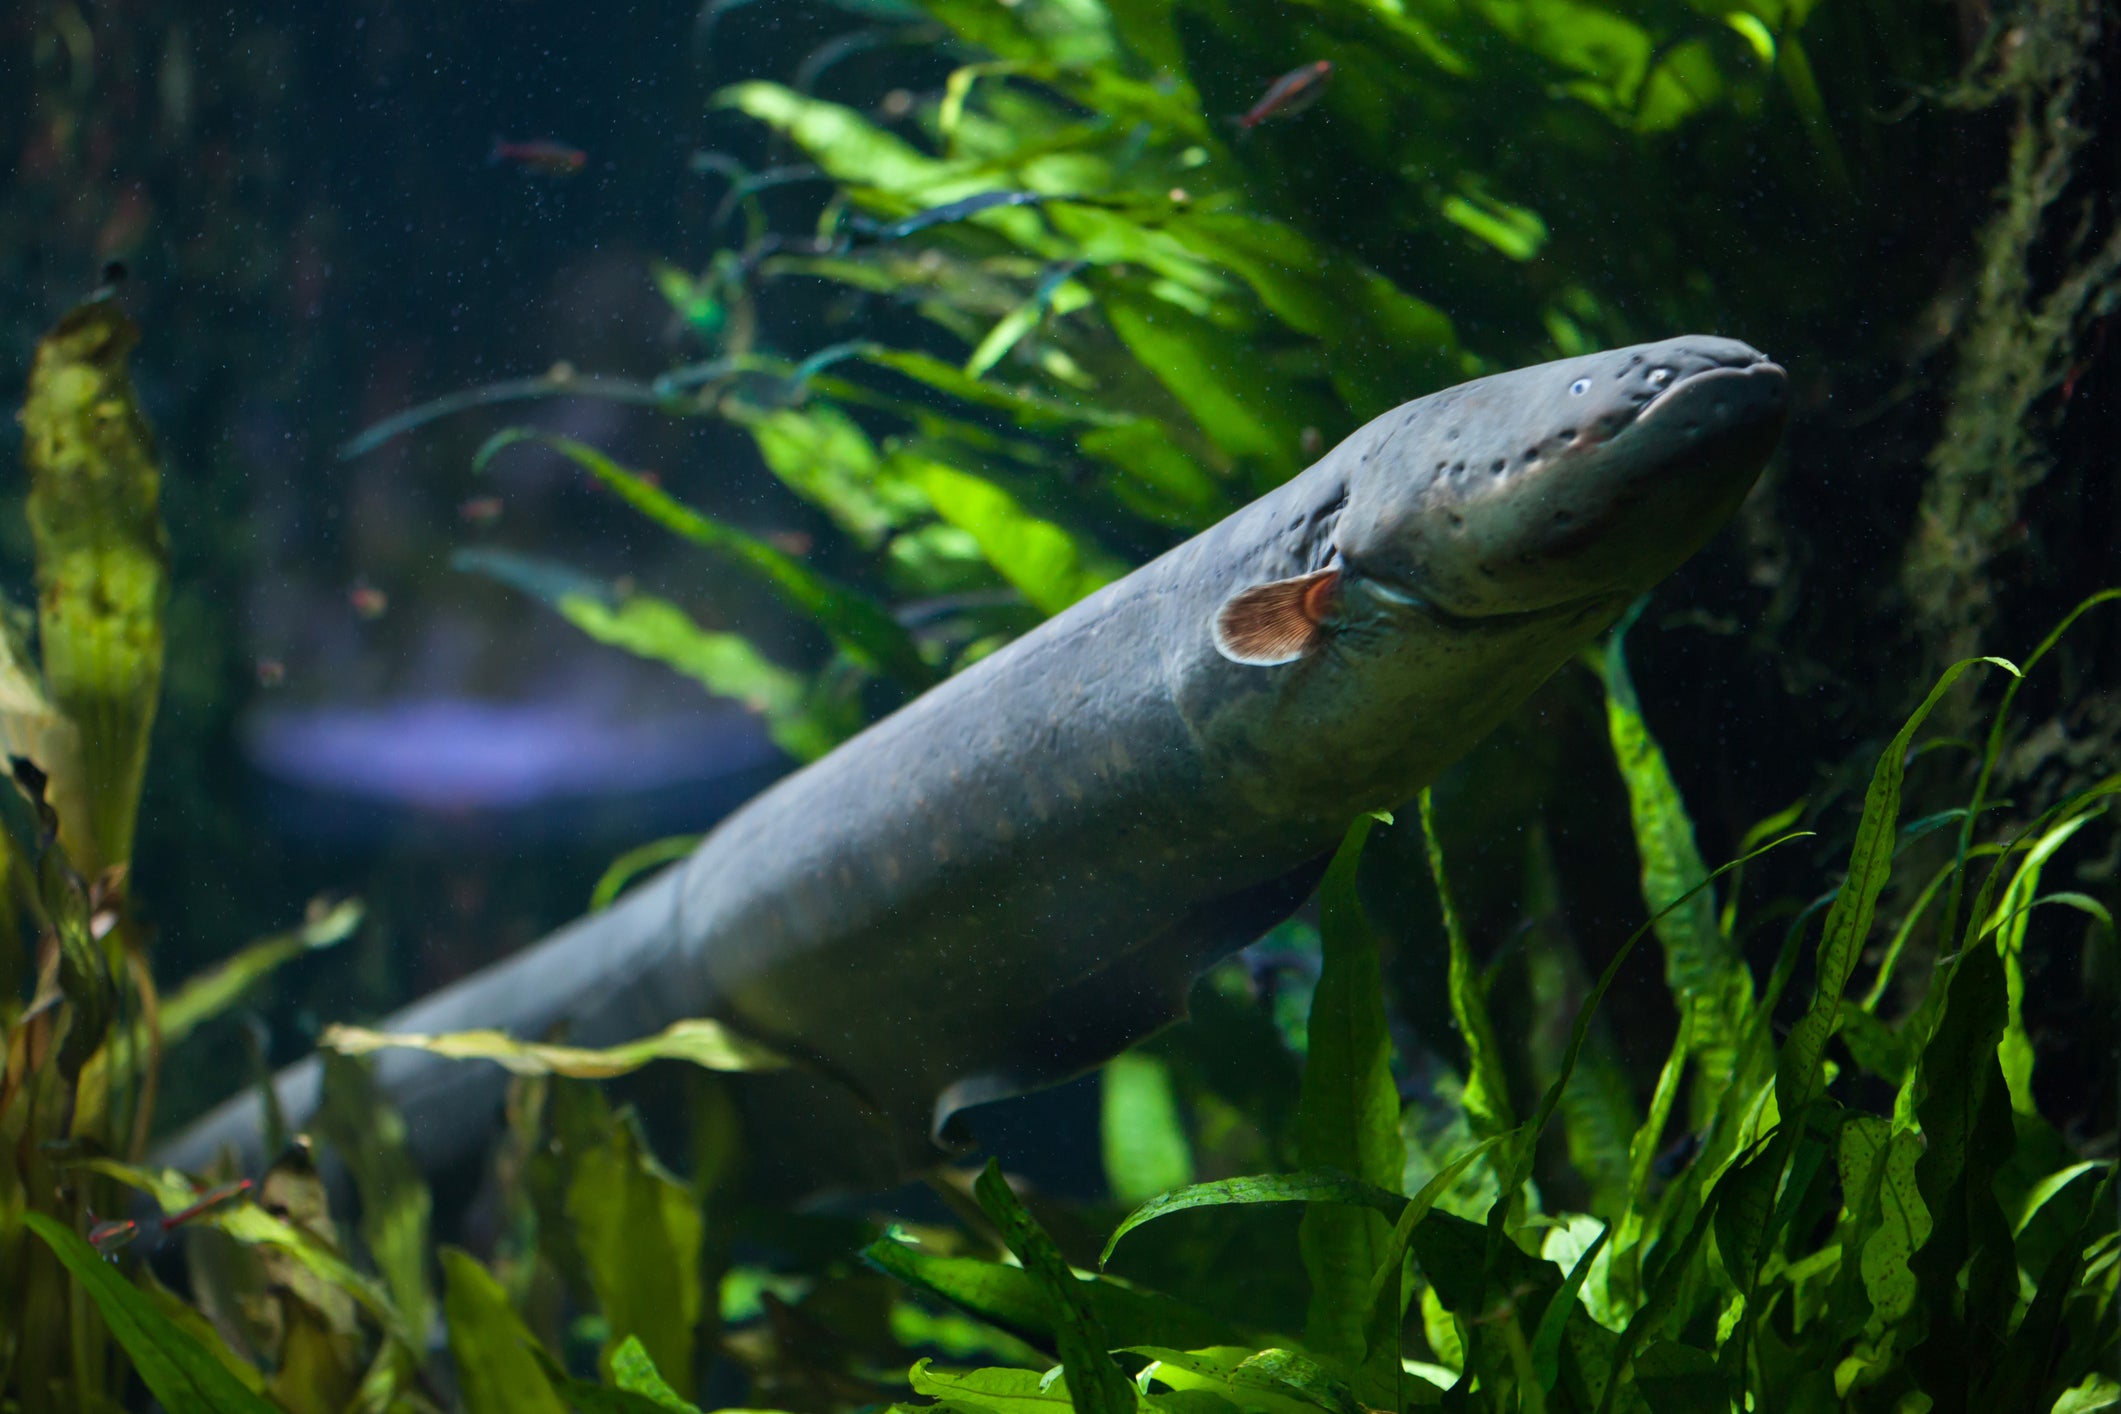 A new study overturns the idea that electric eels are exclusively solitary predators